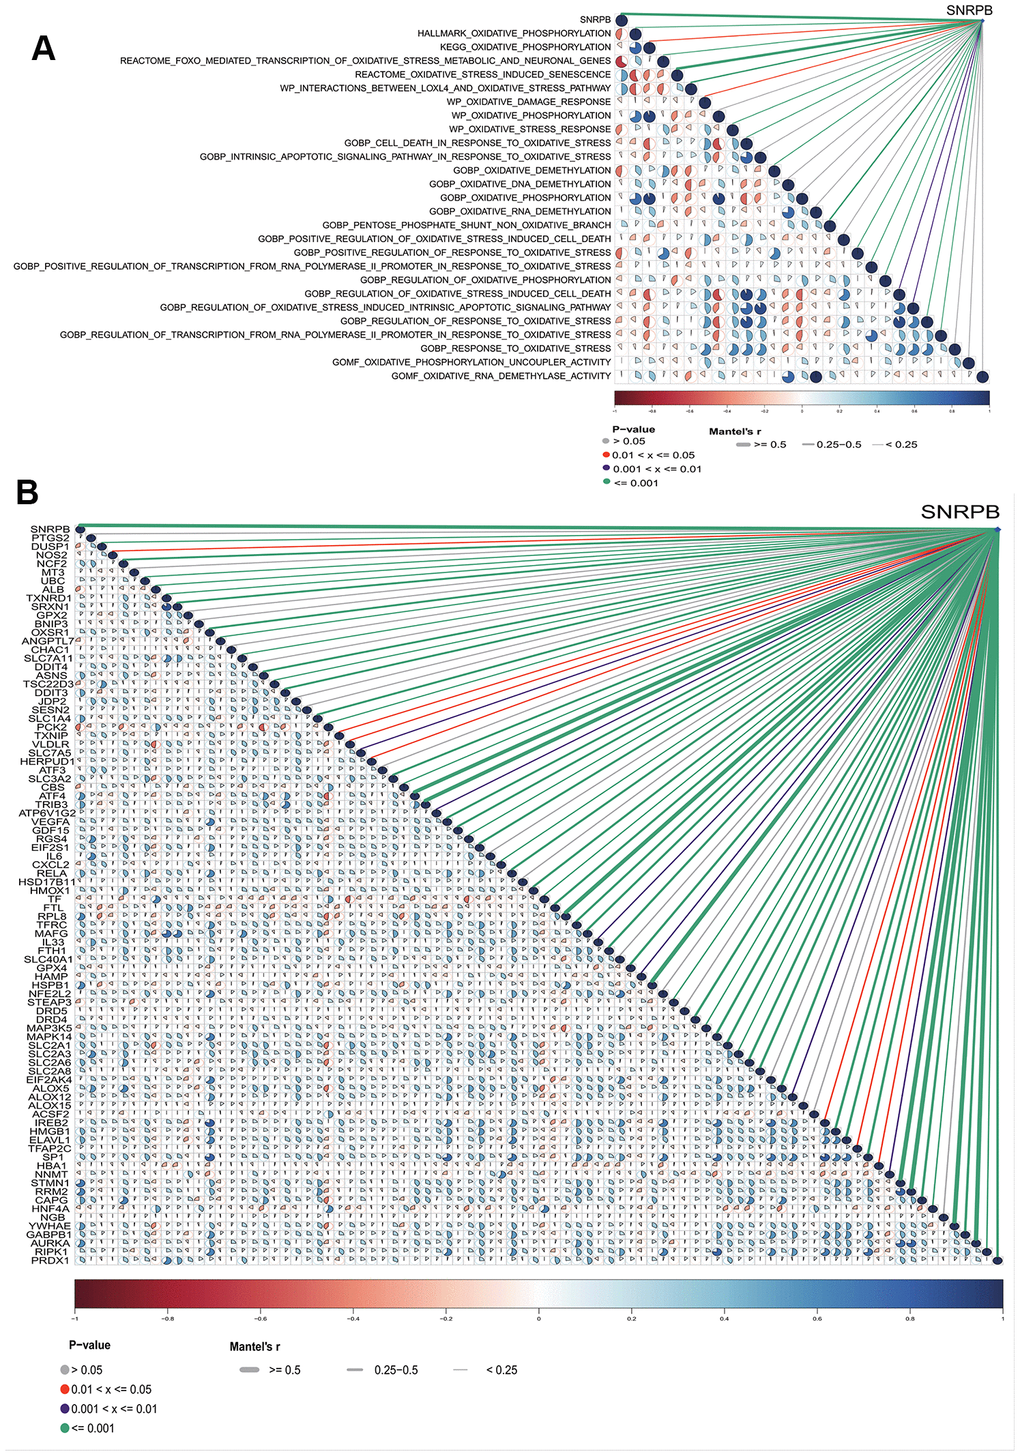 Relationship between SNRPB and oxidative stress-related pathways and oxidative stress-ferroptosis related genes. (A) Correlation analysis between SNRPB and oxidative stress-related pathways in MSigDB database. (B) Correlation analysis between SNRPB and oxidative stress-ferroptosis related genes in GeneCards and FerrDb databases. The color of sectors indicates the correlation (blue = positive, red = negative). The darker the sector color and the larger the sector area, the larger the correlation coefficient. The purple line means p p p 